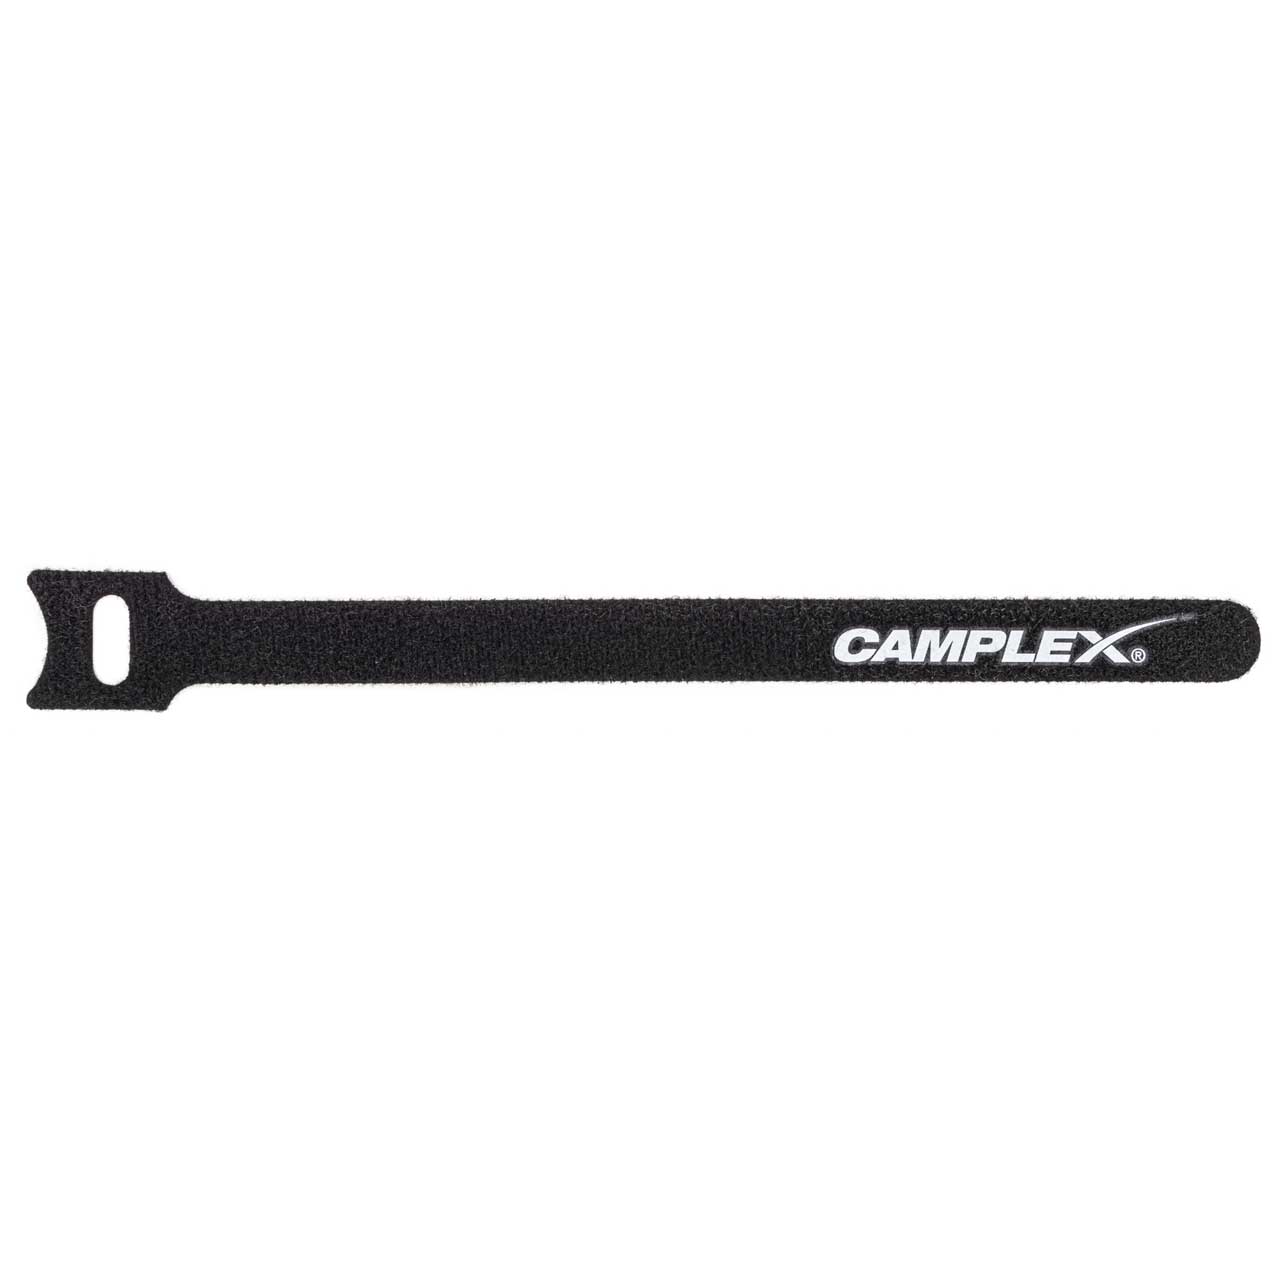 Camplex Hook and Loop Cable Wrap 12mm x 180mm Black with White Logo - 2500 Pack CMX-HKNLP-2500PK